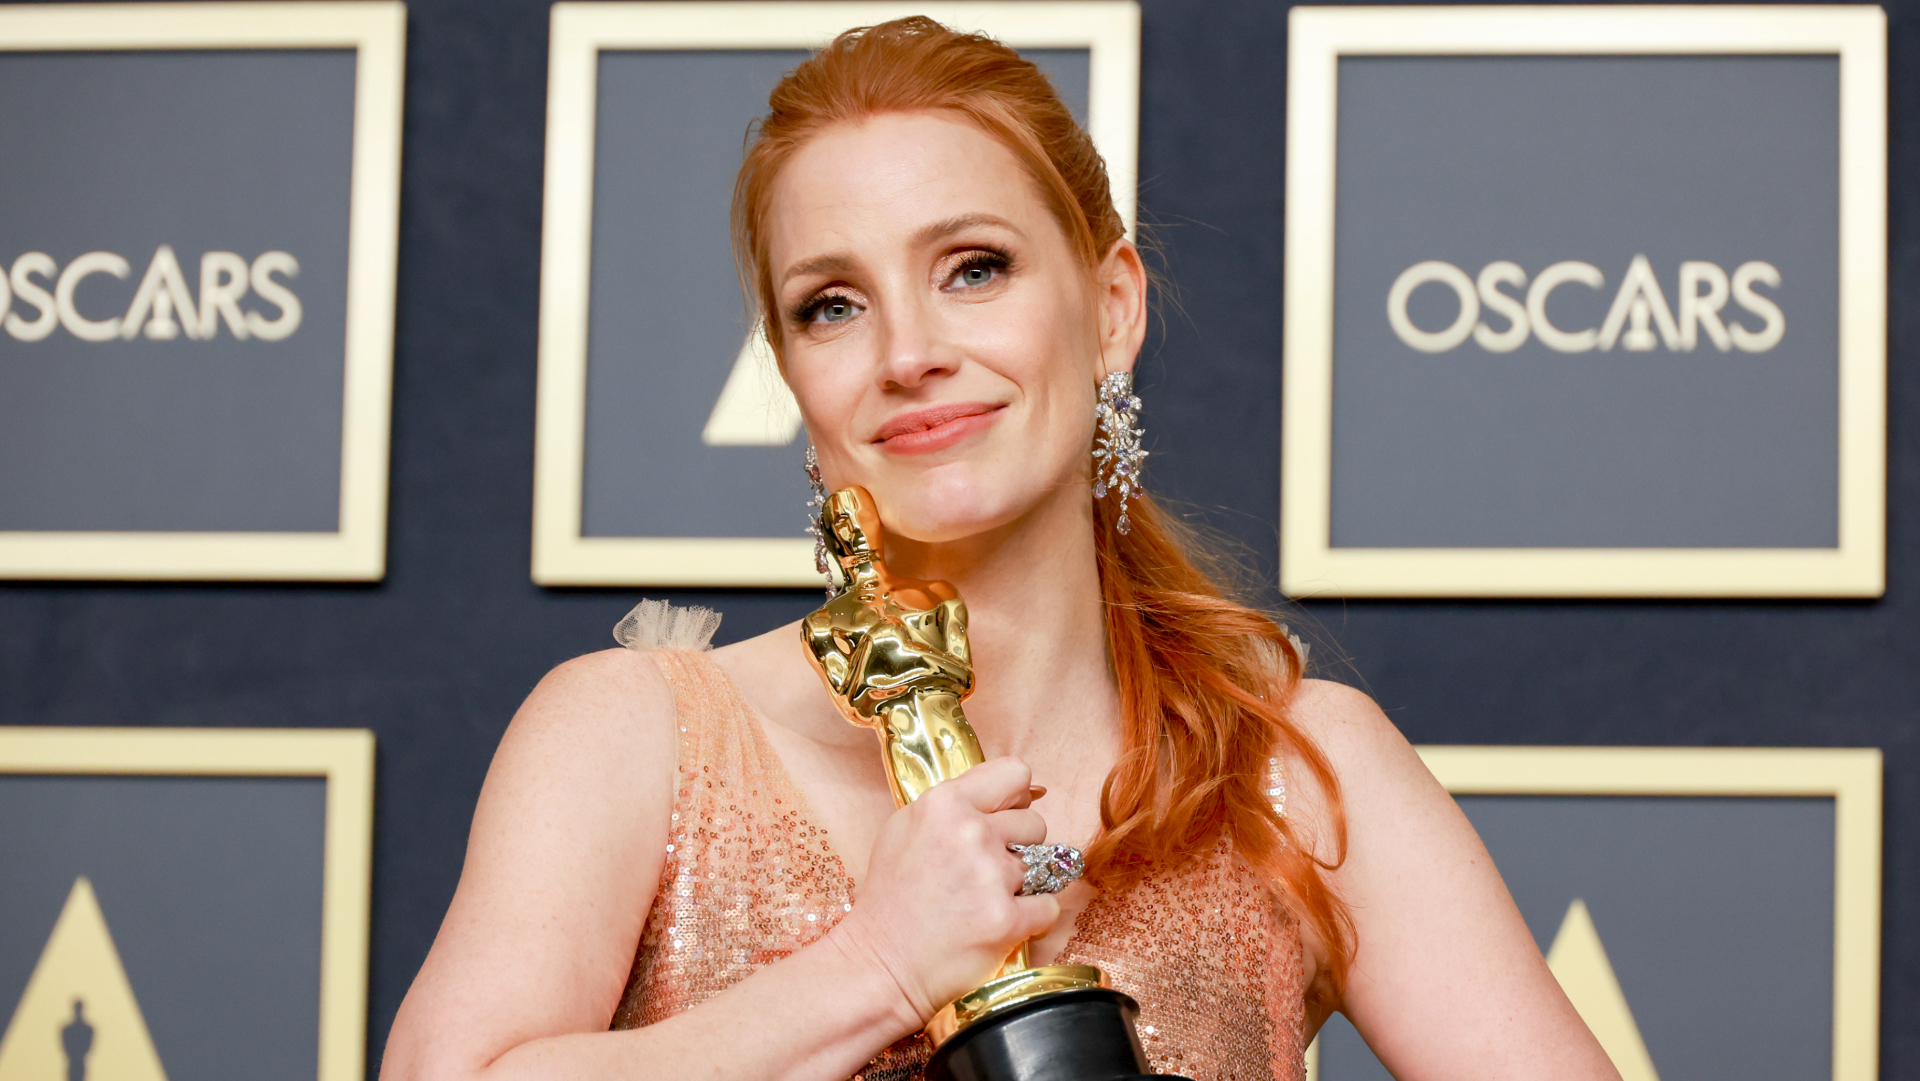  Jessica Chastain reflects on her Oscars win following Will Smith and Chris Rock's altercation 